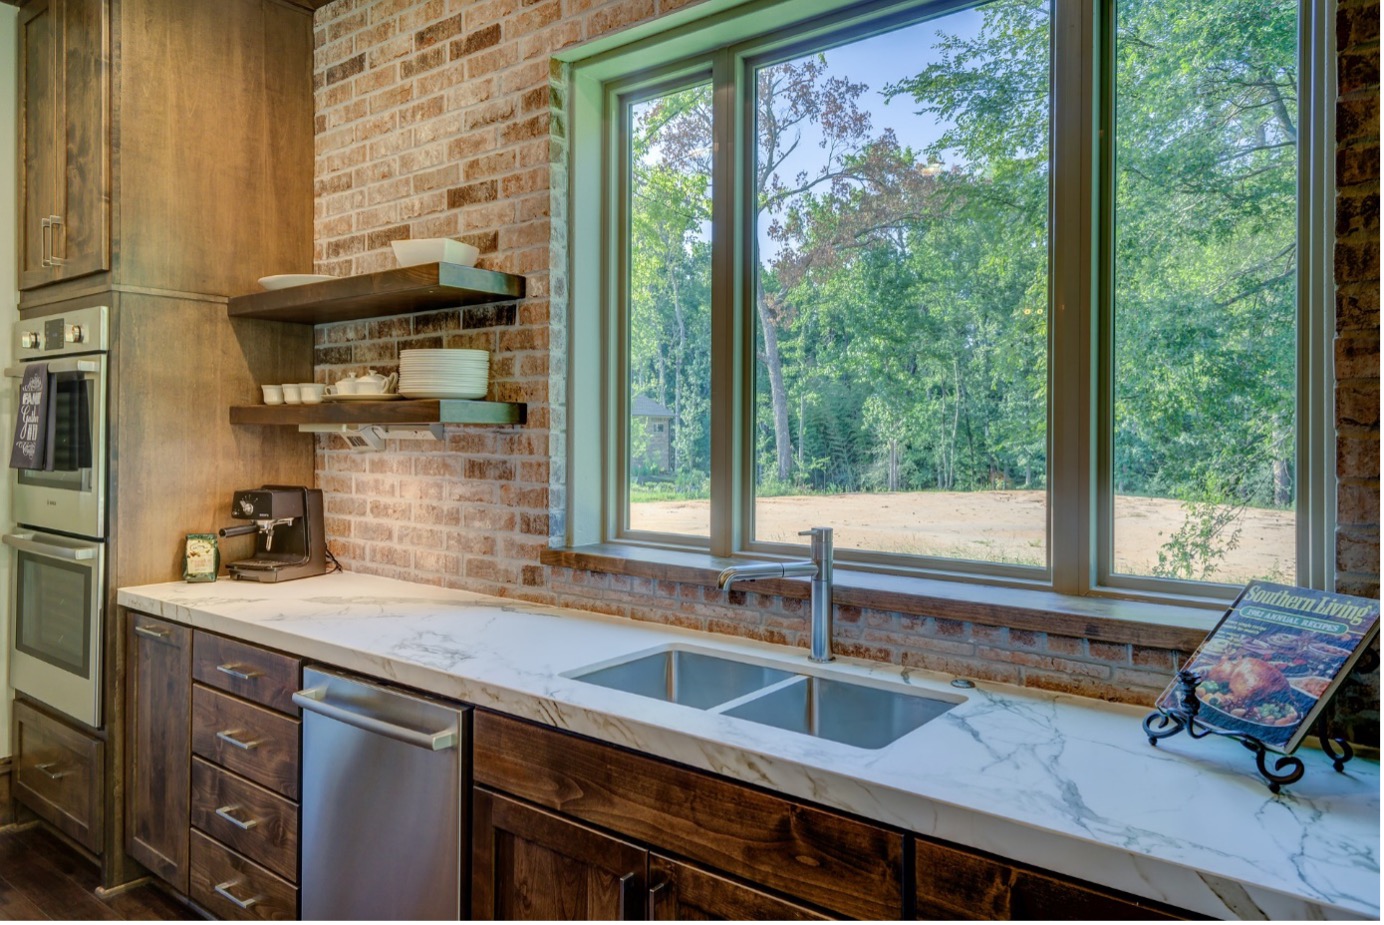 modern dark wood brushed lower cabinets with fresh white marble countertops and brand new stainless kitchen faucet and sink overlooking large field in backyard through large rectangular window